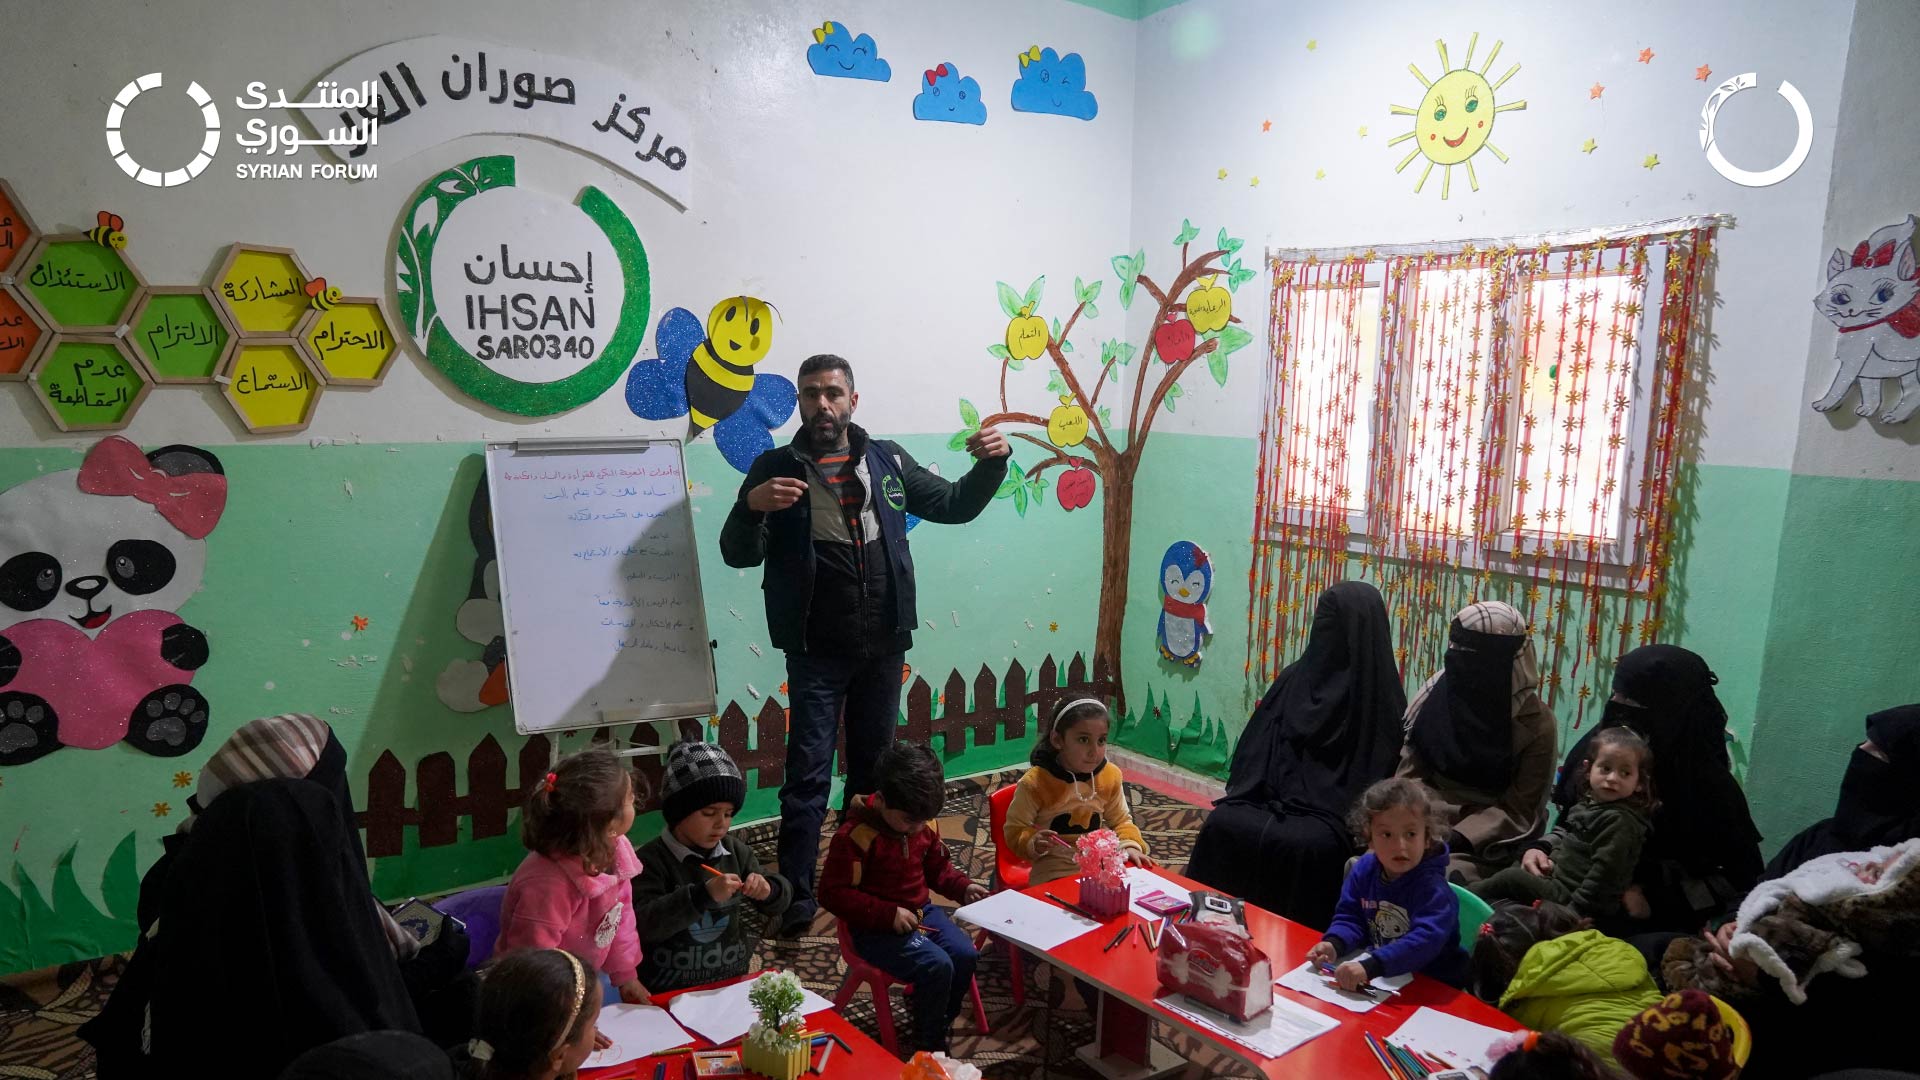 Training mothers in parenting skills in northwest Syria